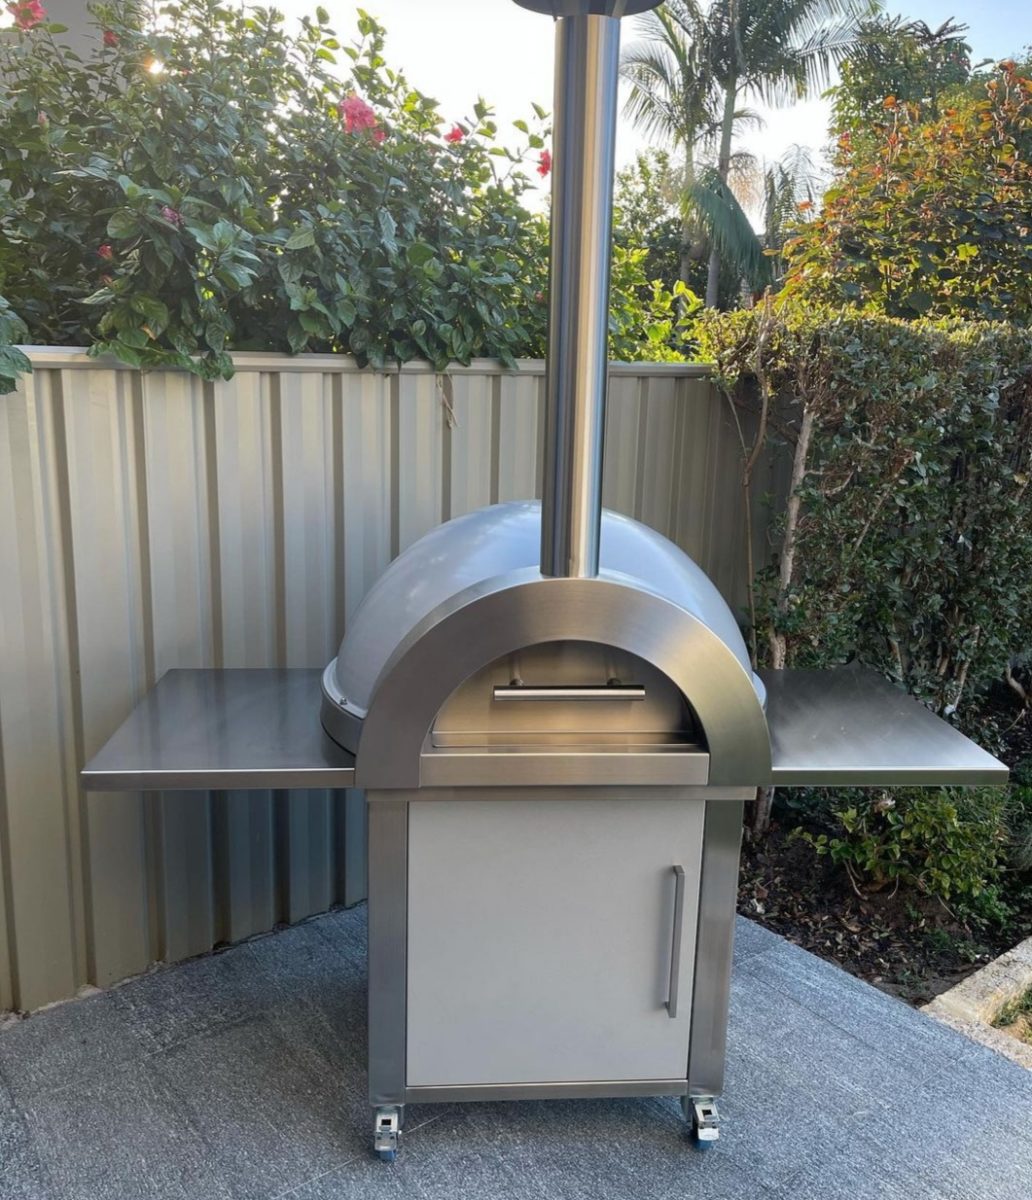 The Western Australian company Zesti make some of the best portable pizza ovens on the market